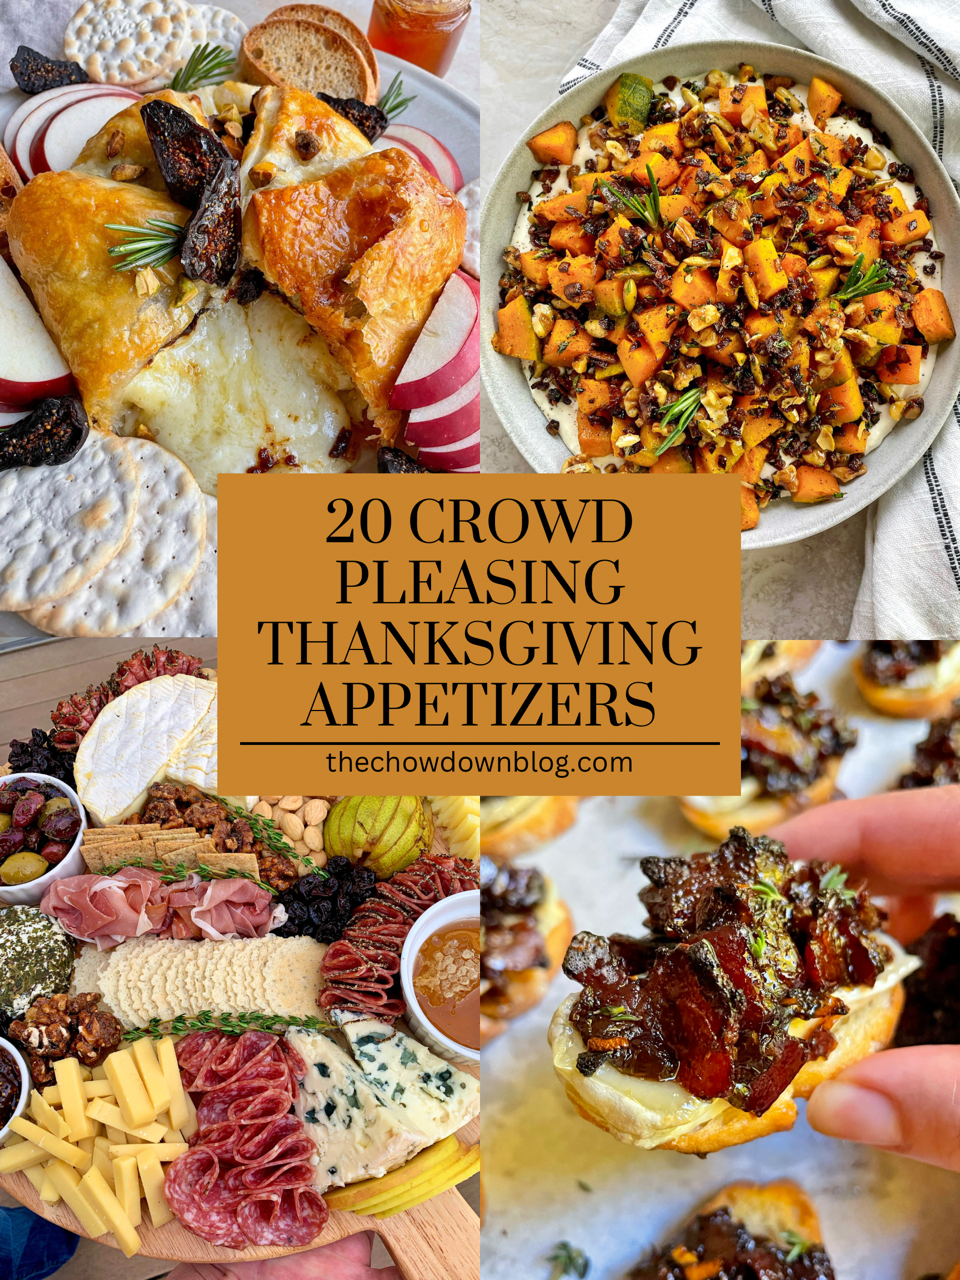 20 Crowd Pleasing Thanksgiving Appetizers